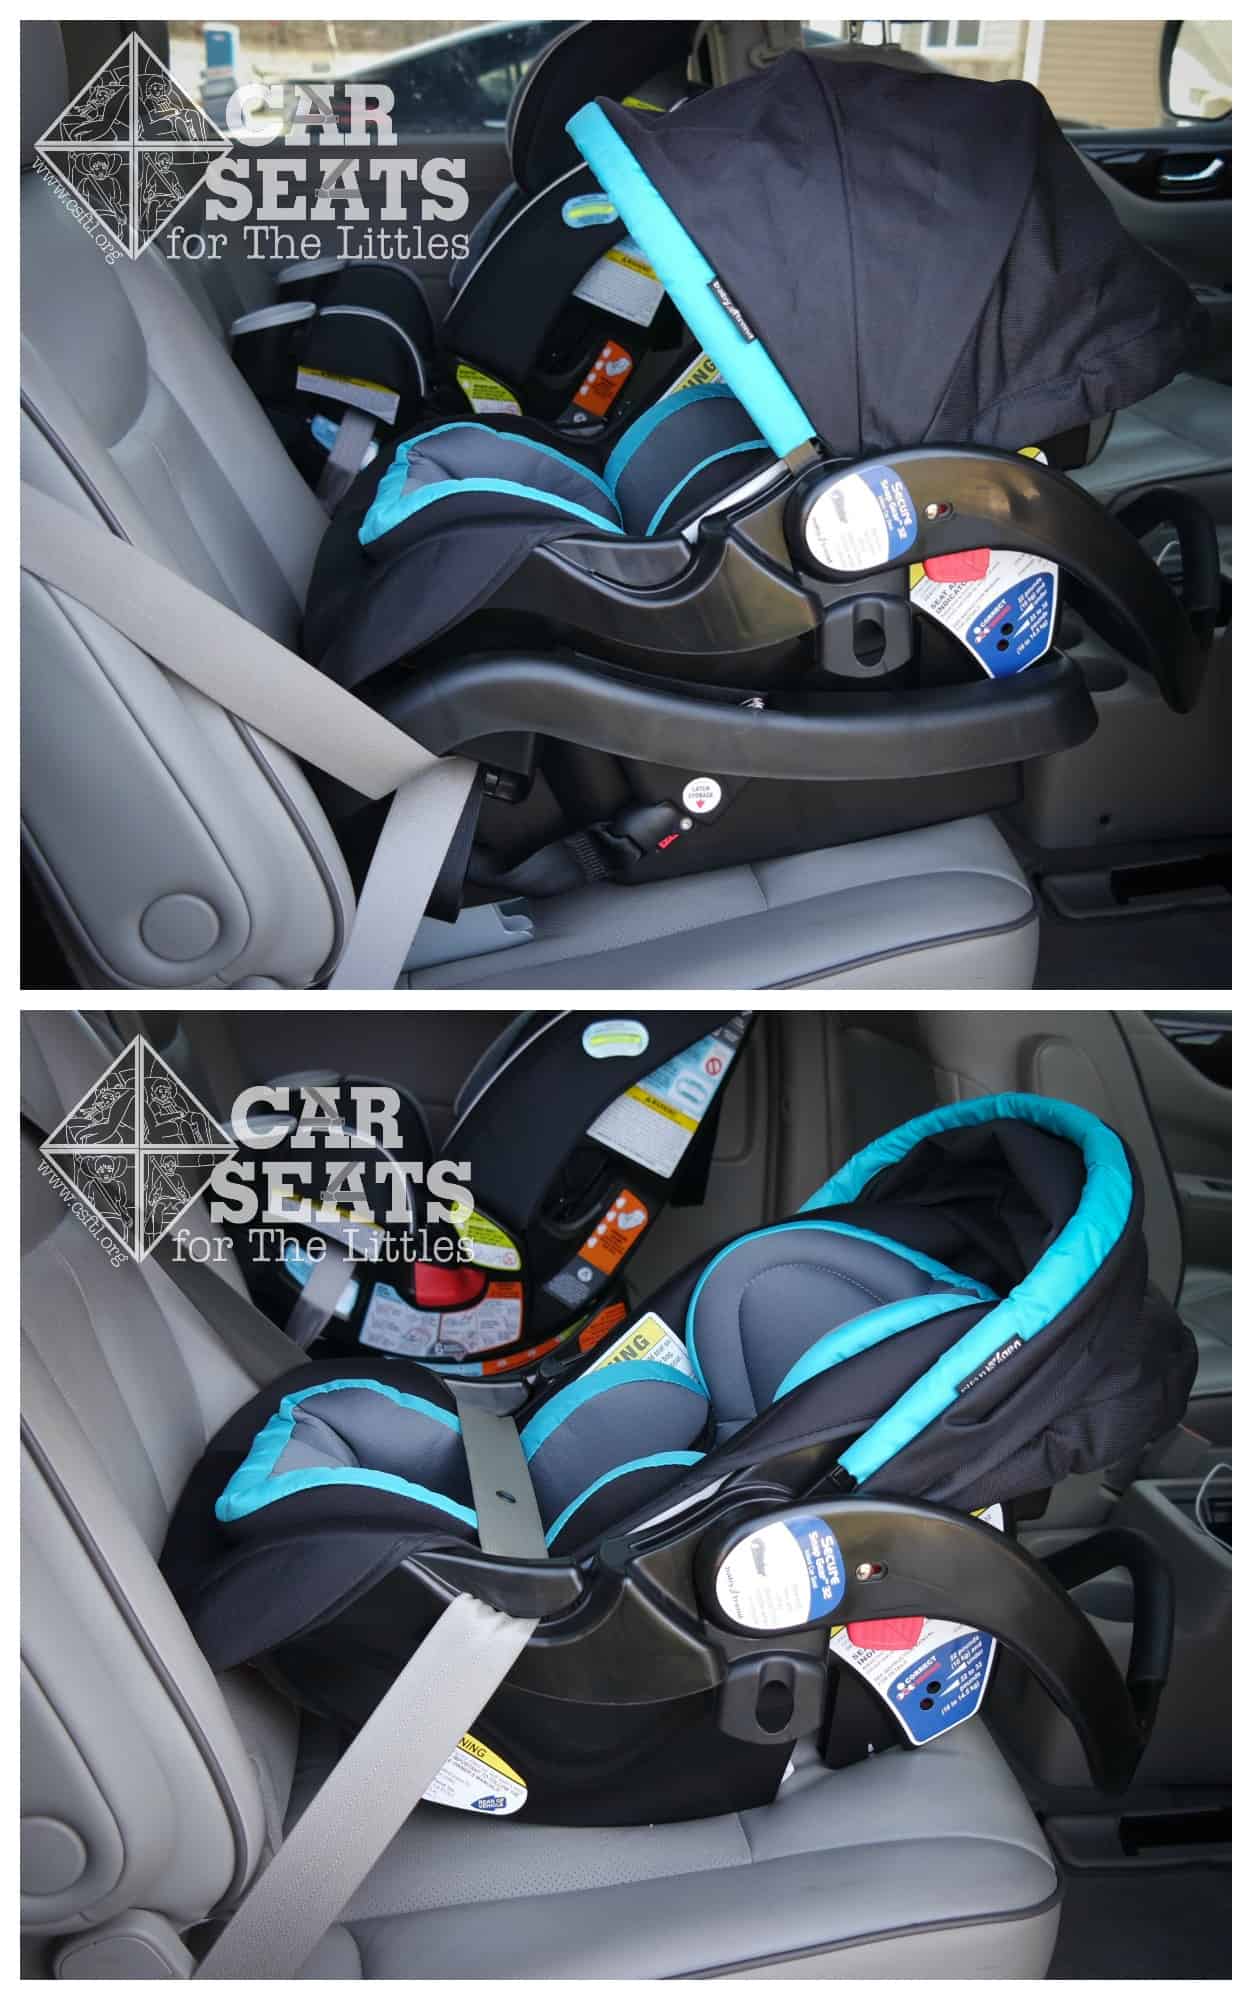 Installing Baby Trend Car Seat Base Free Delivery Goabroad Org Pk - How To Install Baby Trend Car Seat With Seatbelt